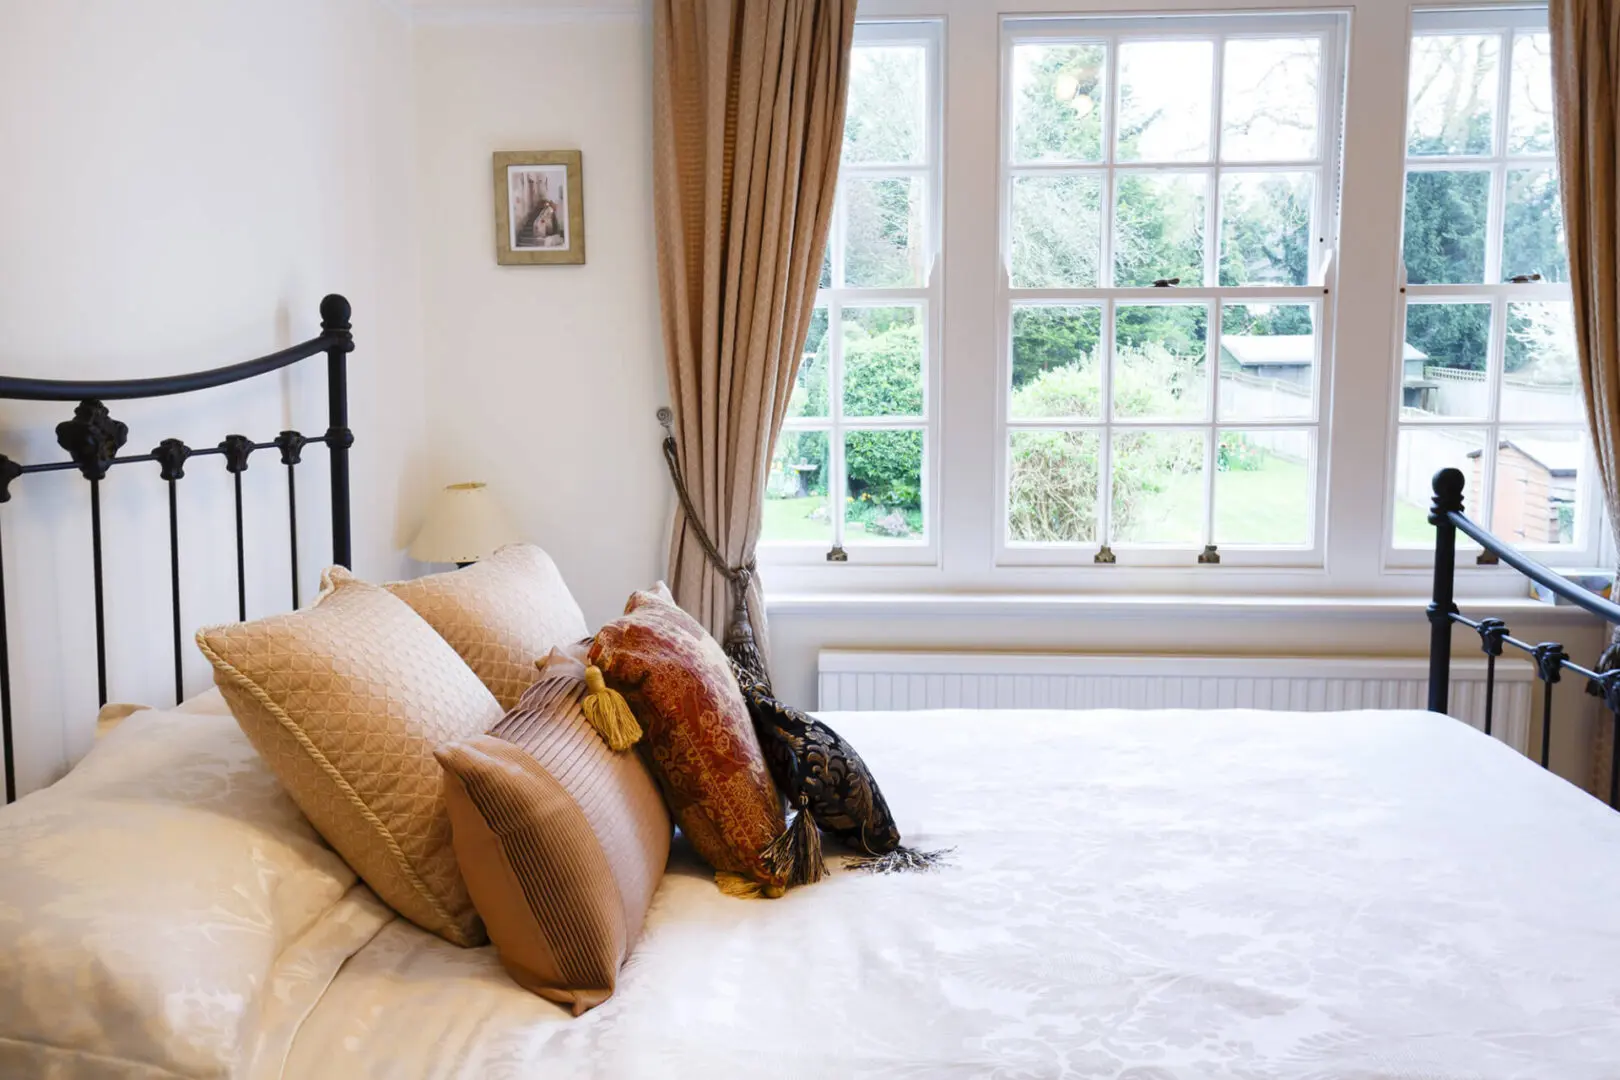 Bedroom of a period British house with sash windows and traditional interior design